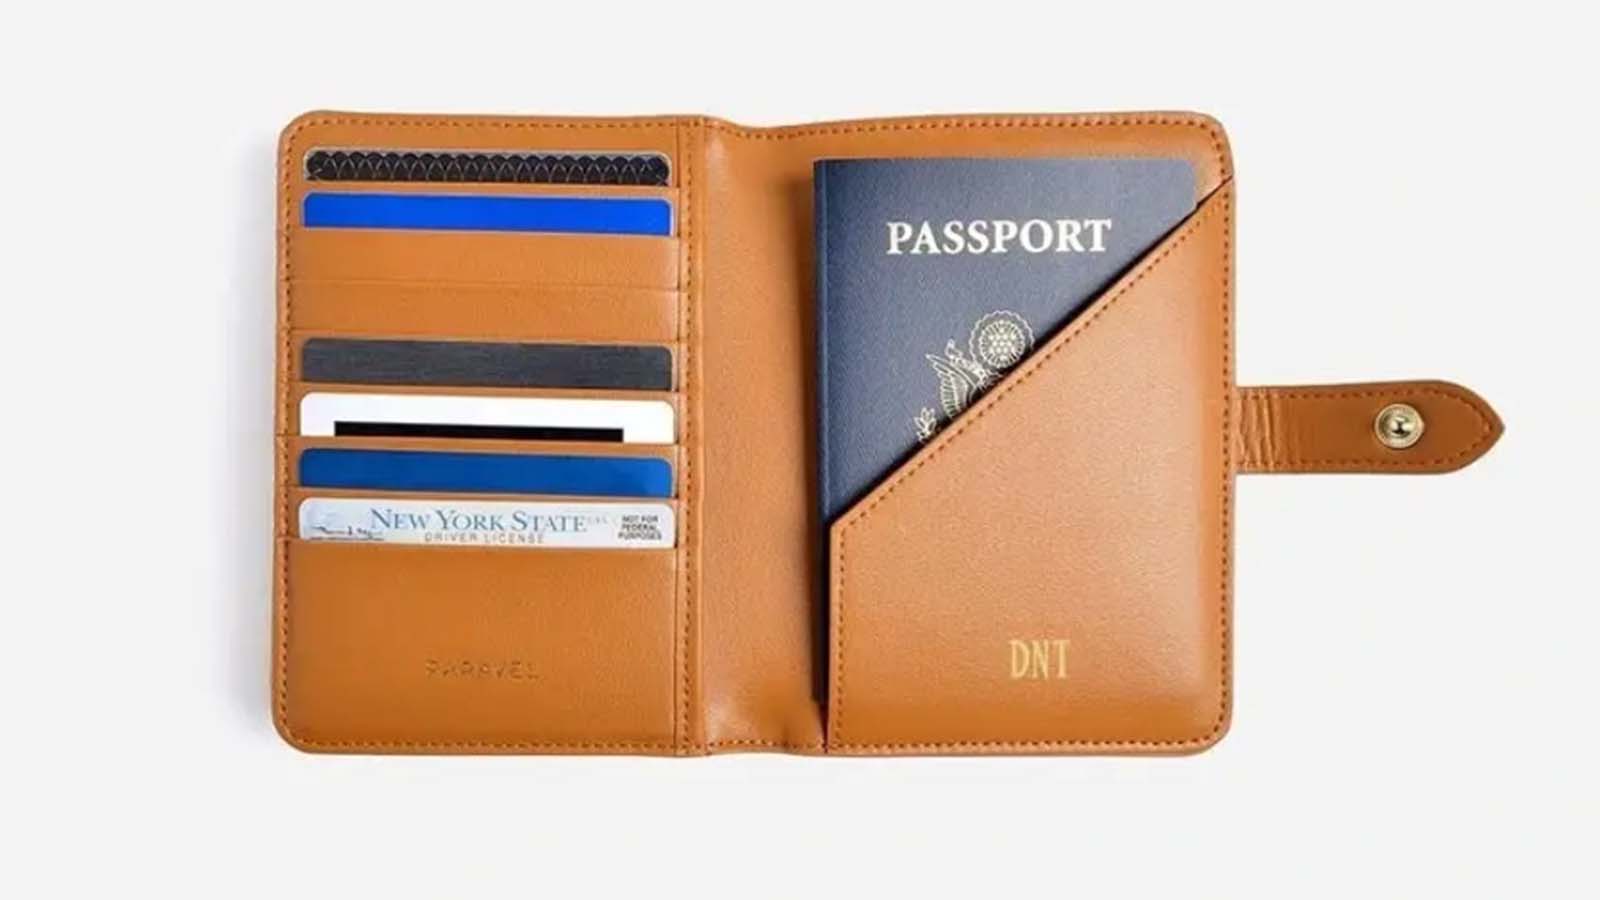 4 Ways to Keep Your Wallet Safe When Traveling - A Trayvax Article